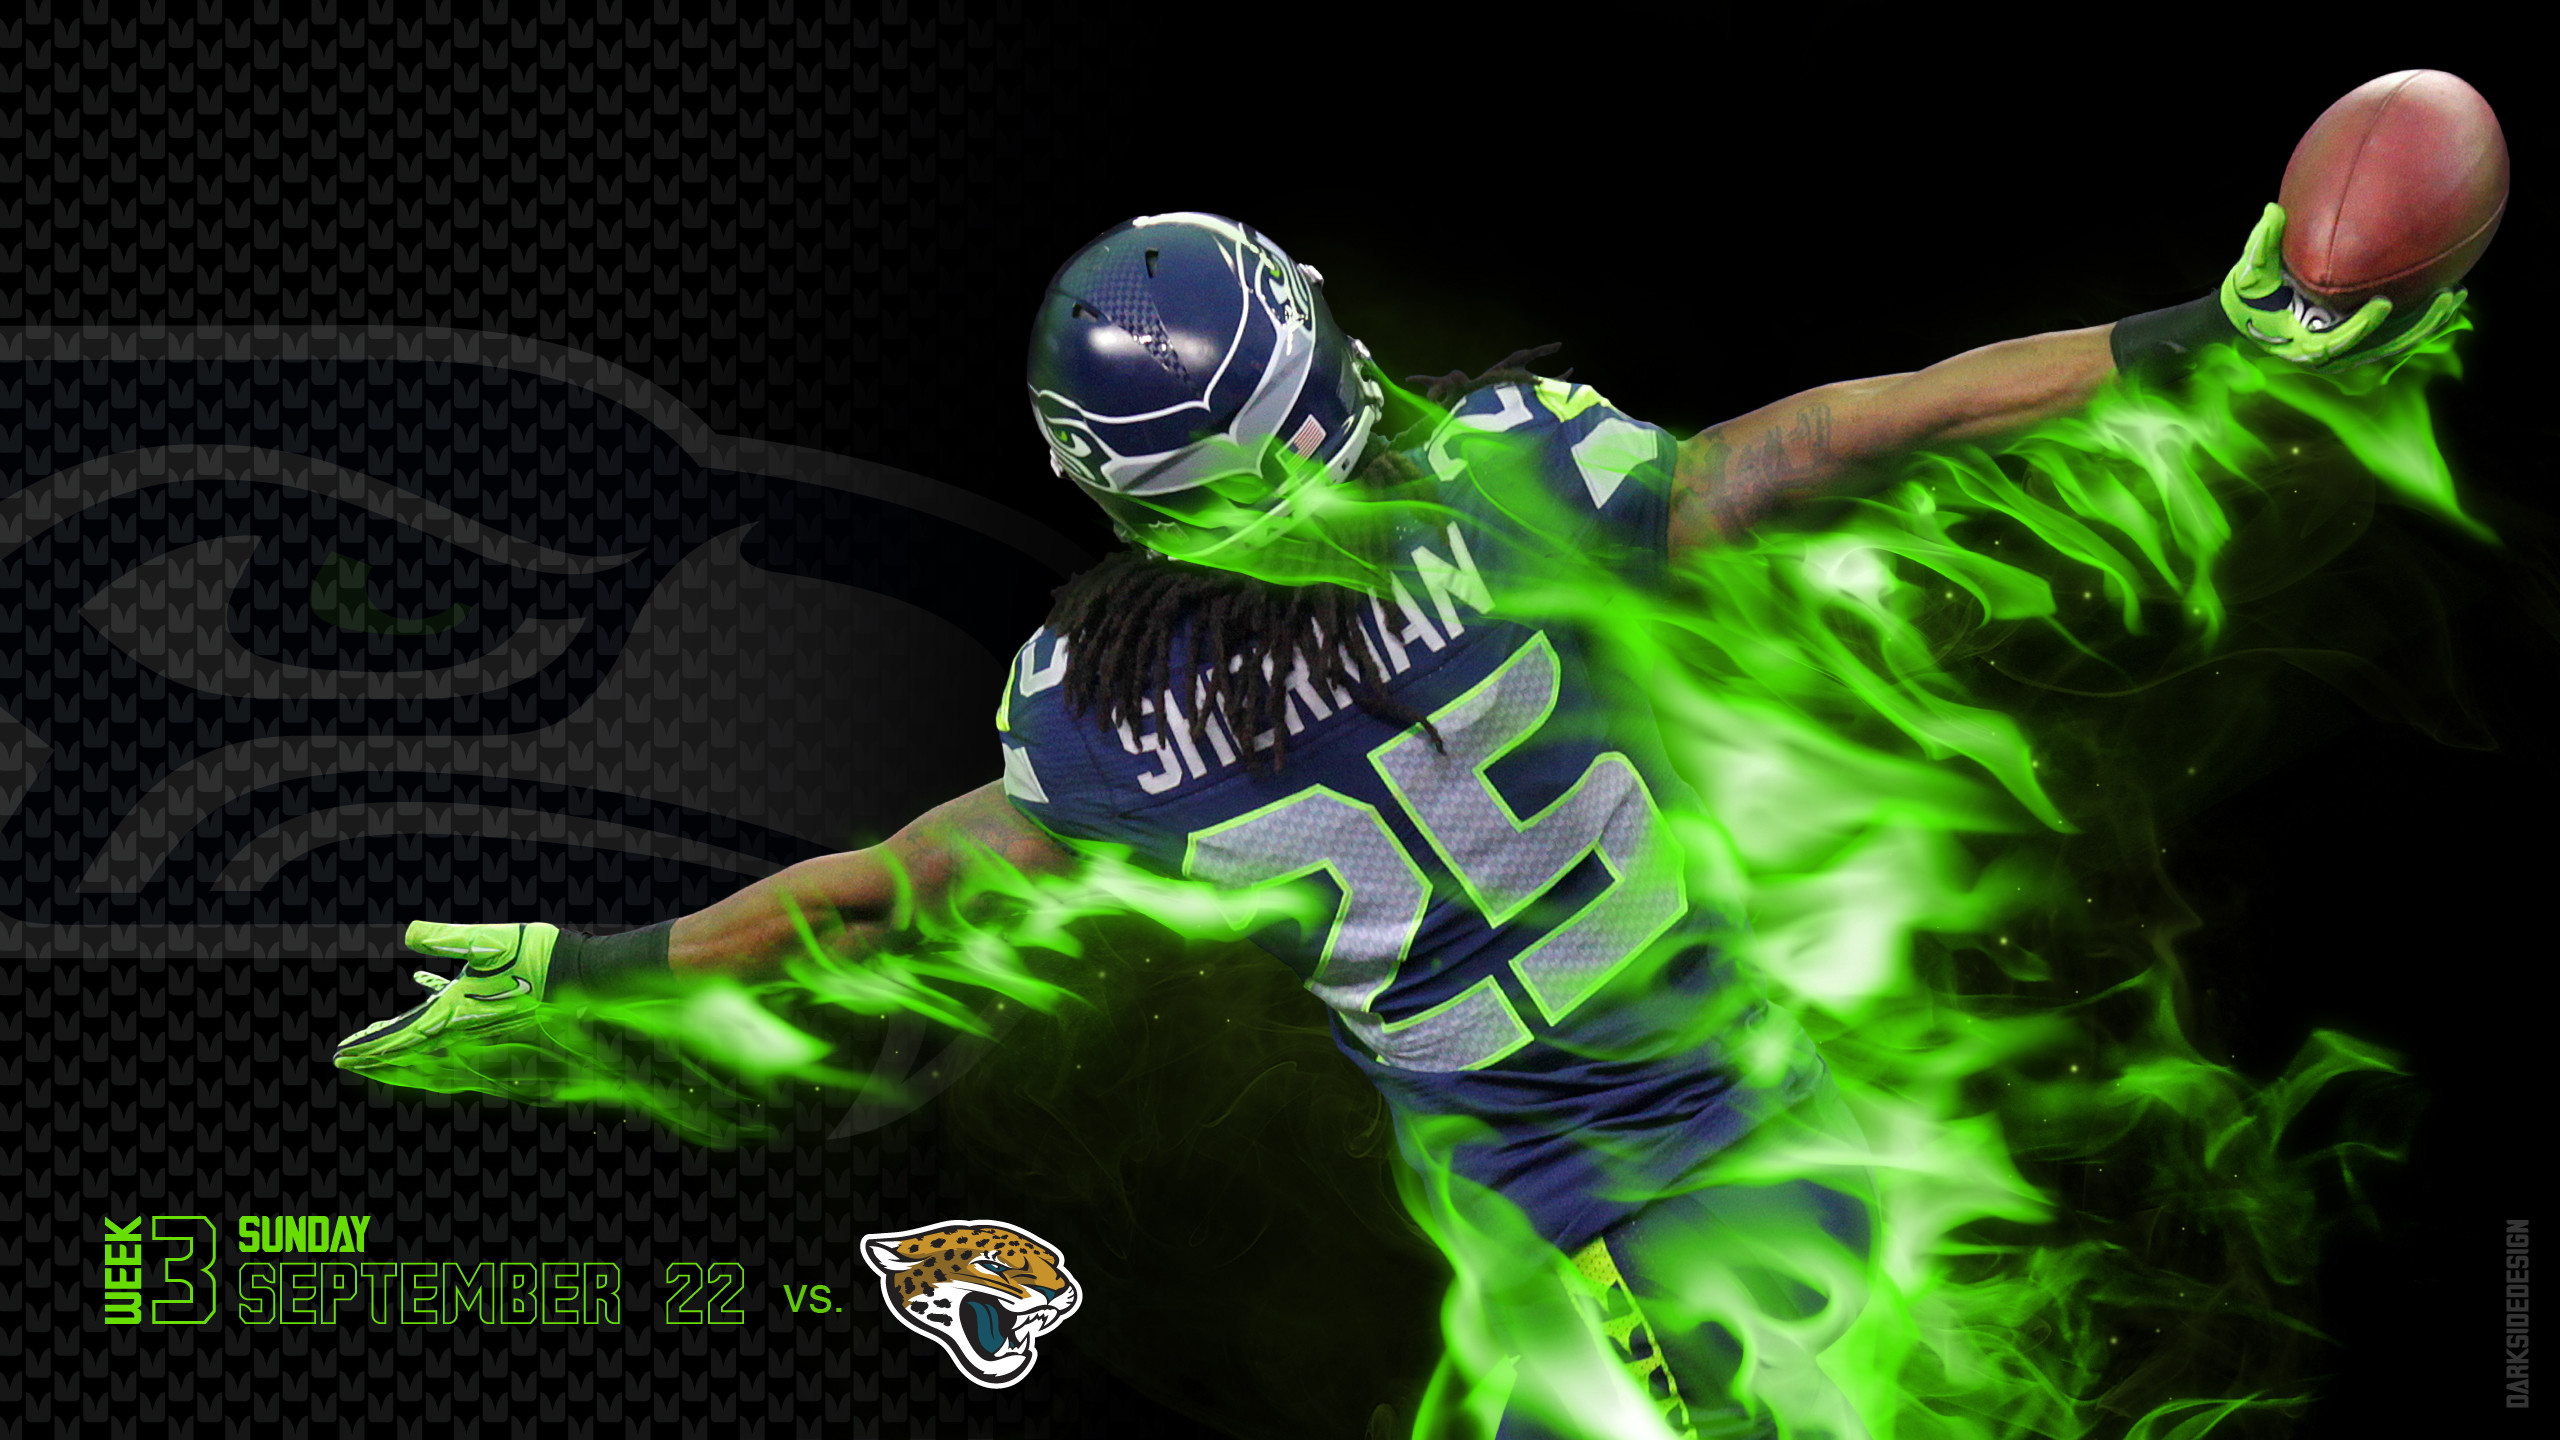 2018 Seahawks Wallpaper 63 Images